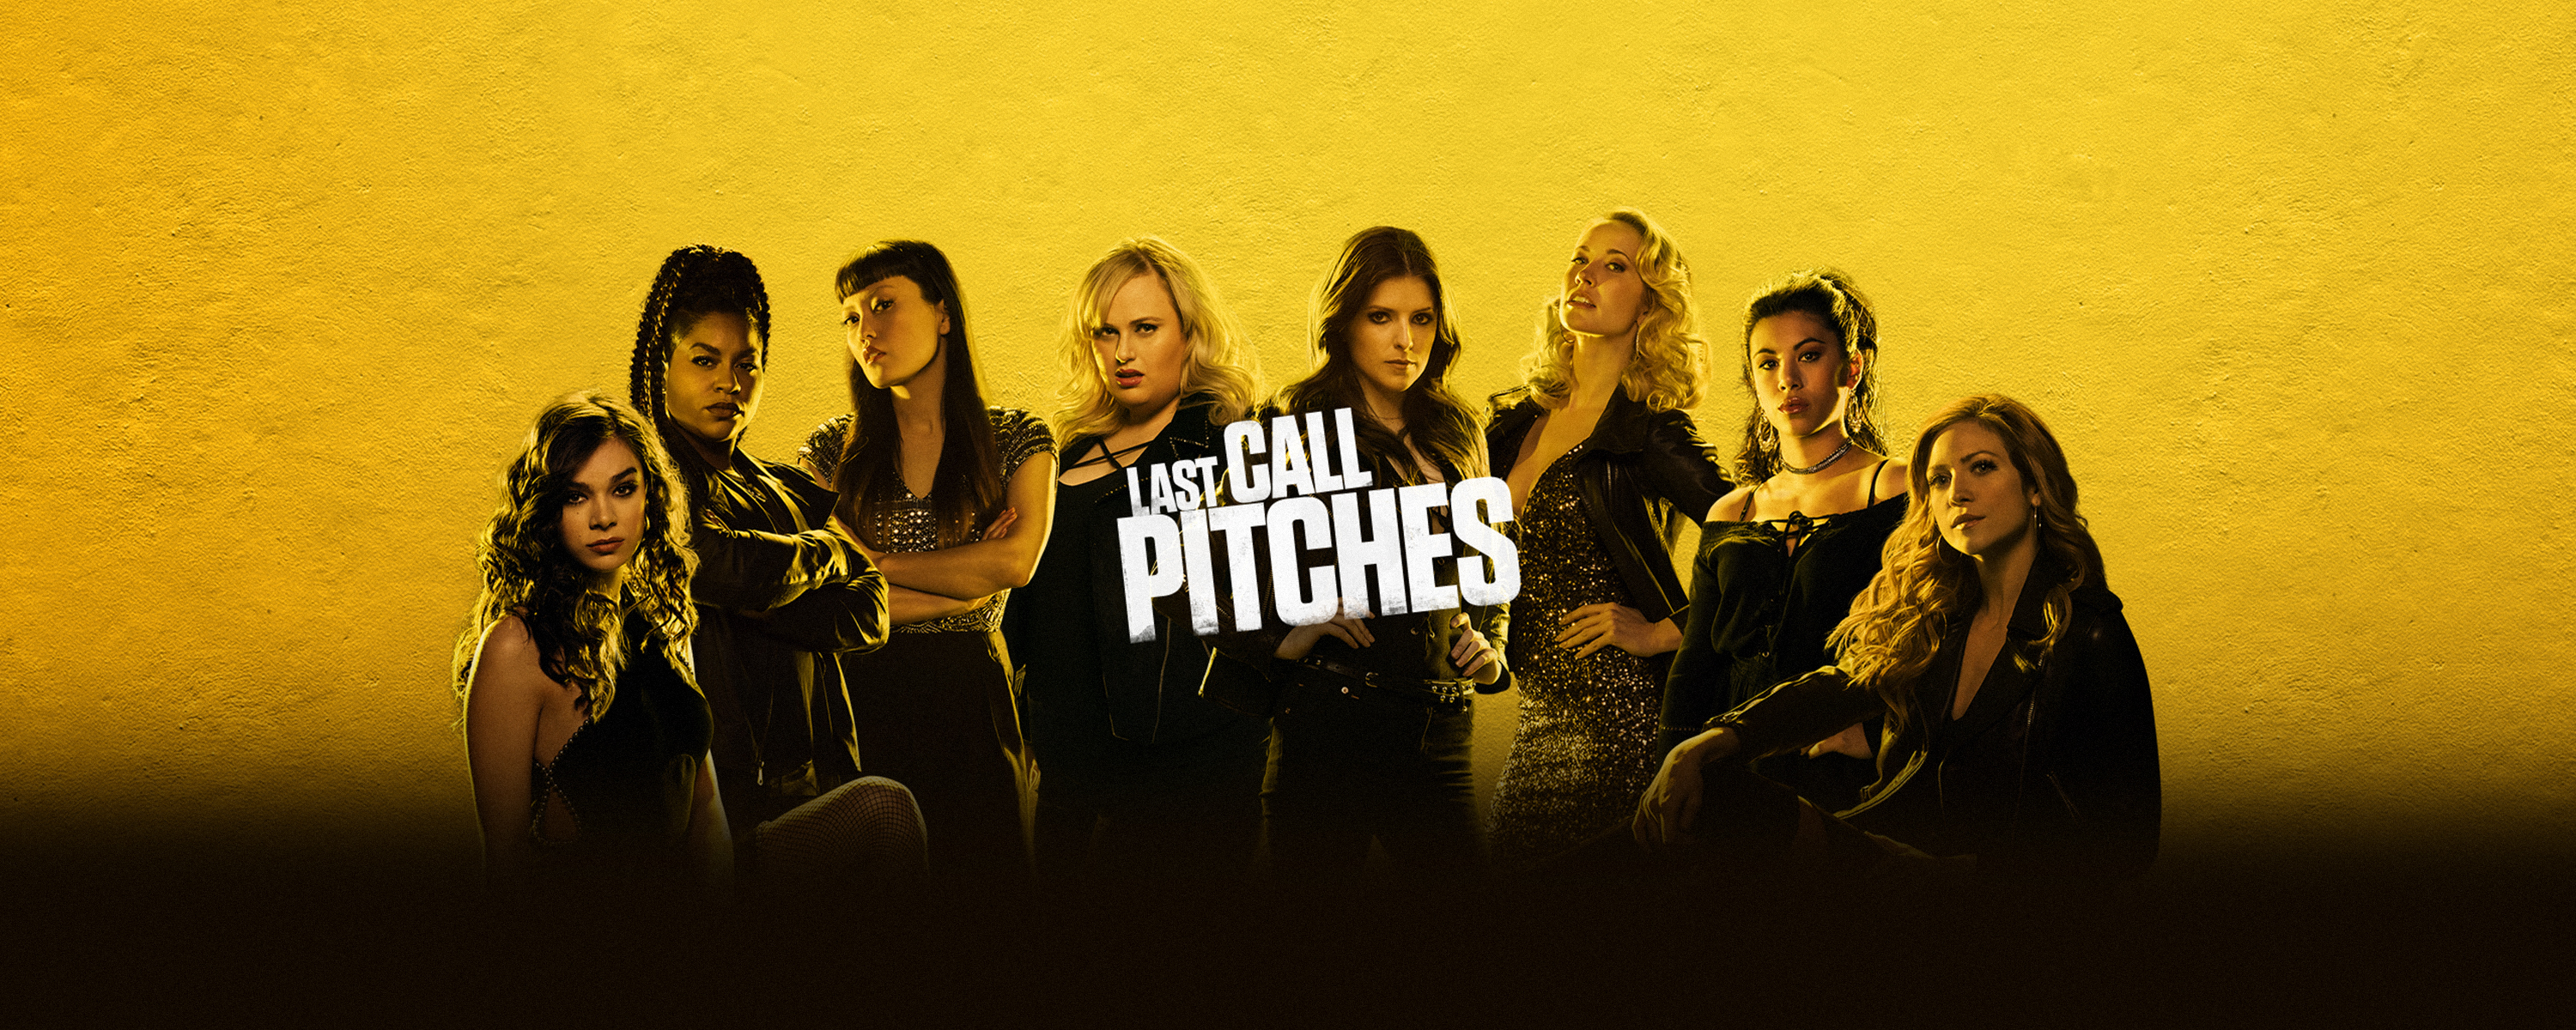 3000x1200 : Universal Pictures: Pitch Perfect